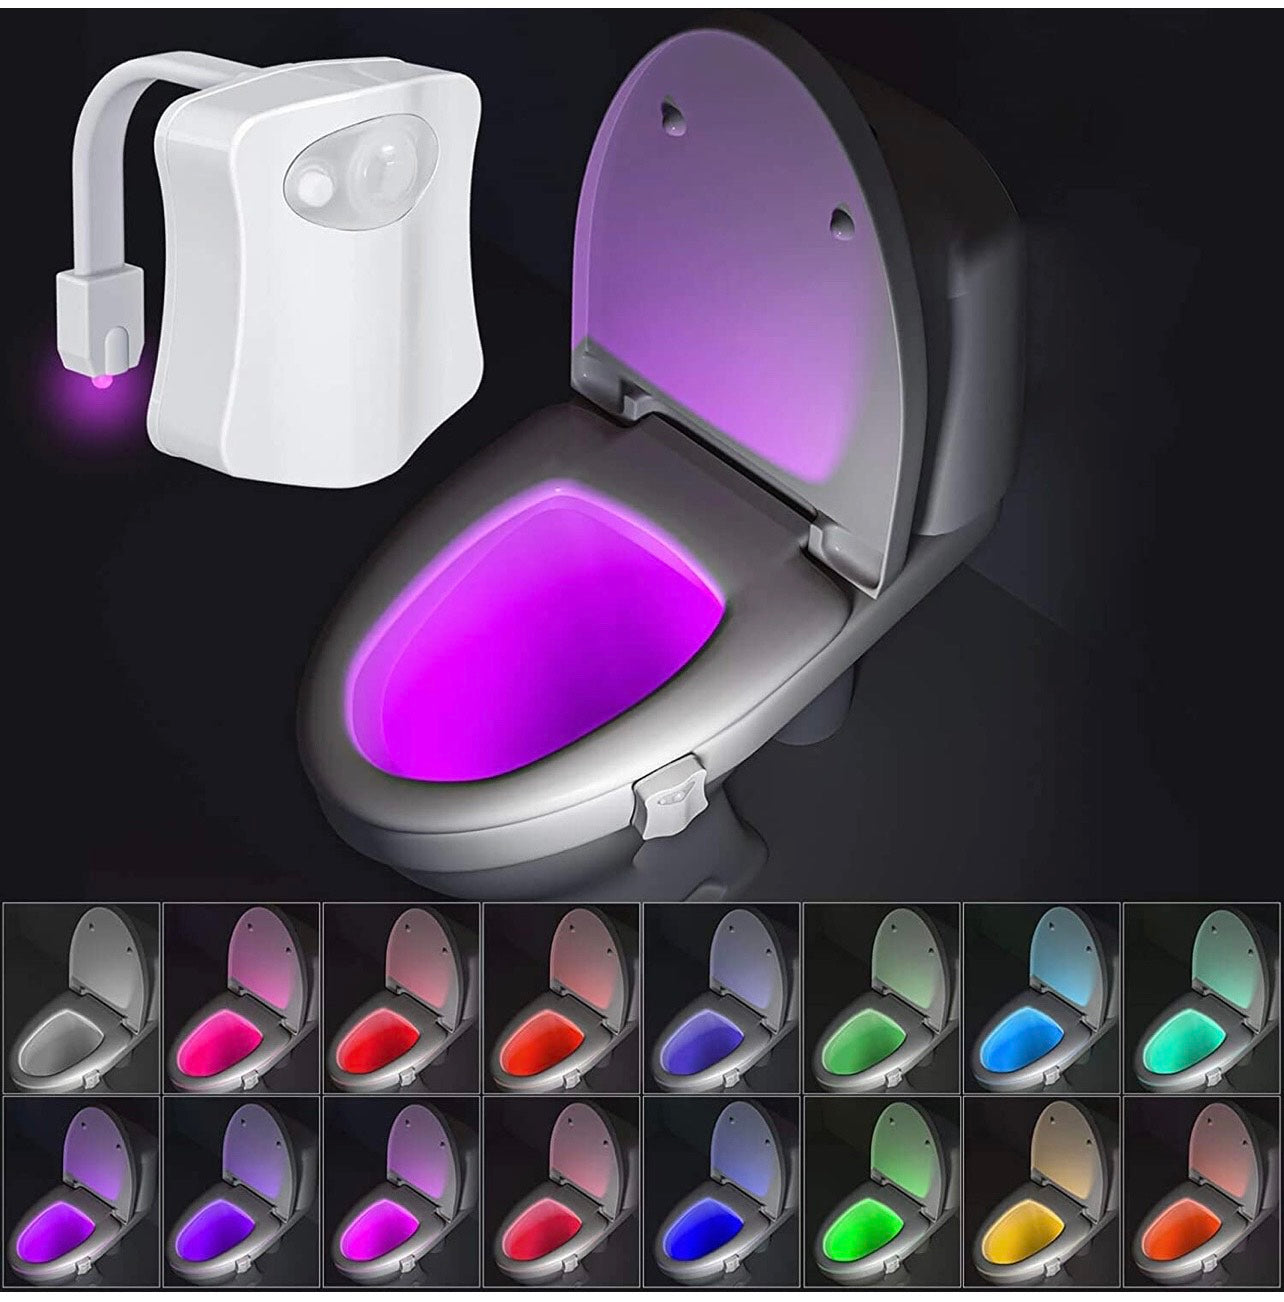 Vintar Motion Activated Toilet Night light: Colorful, 16-Color